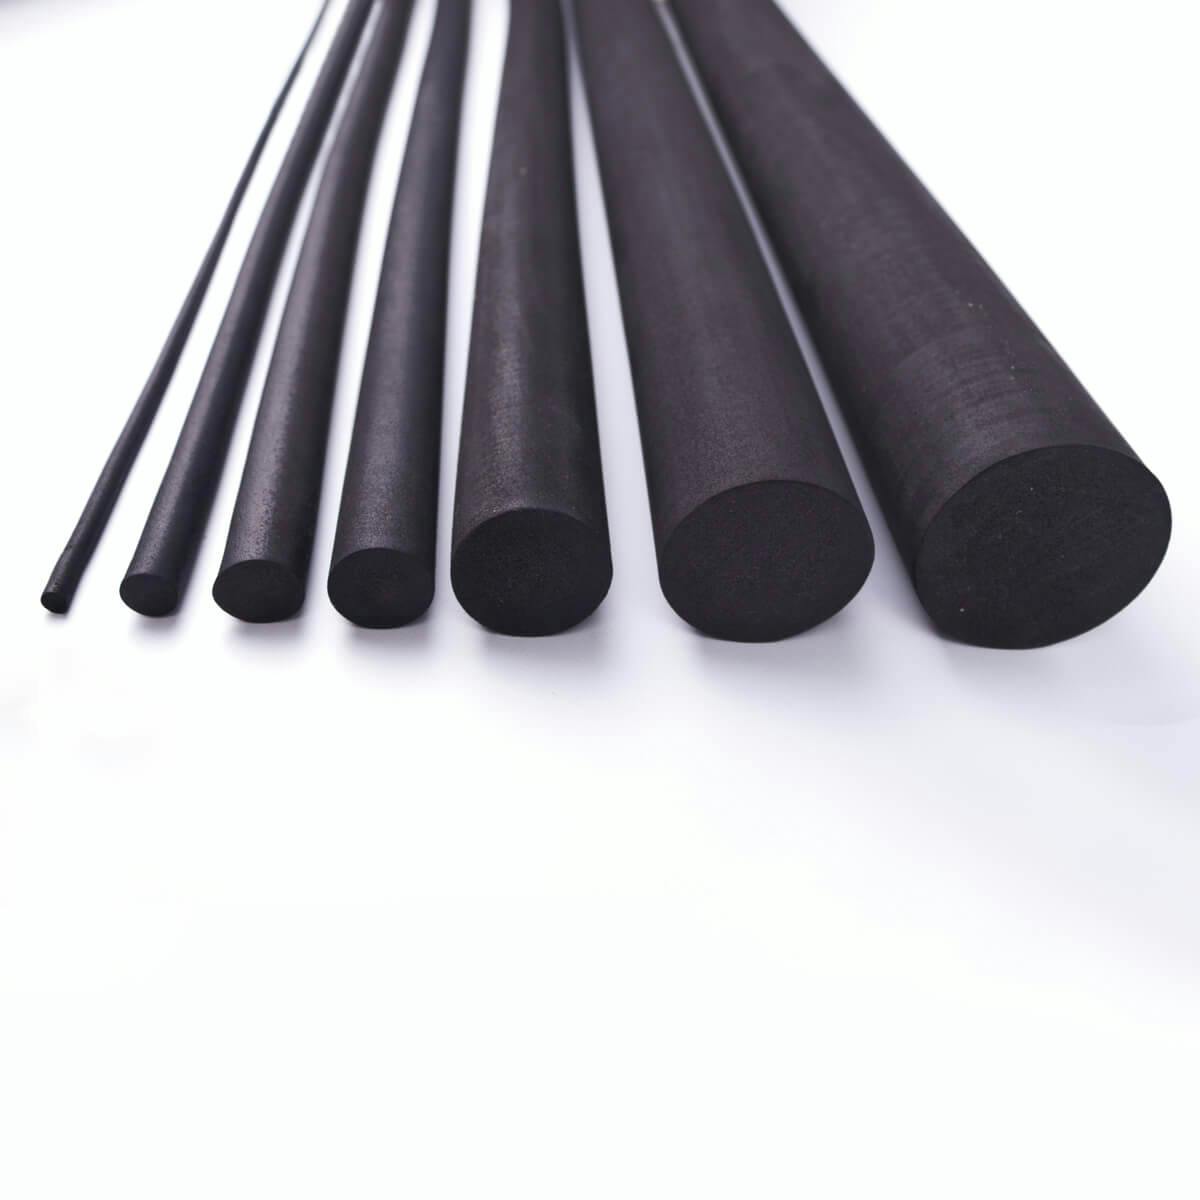 Detail of foam dowels from the front (ordered from smallest diameter)